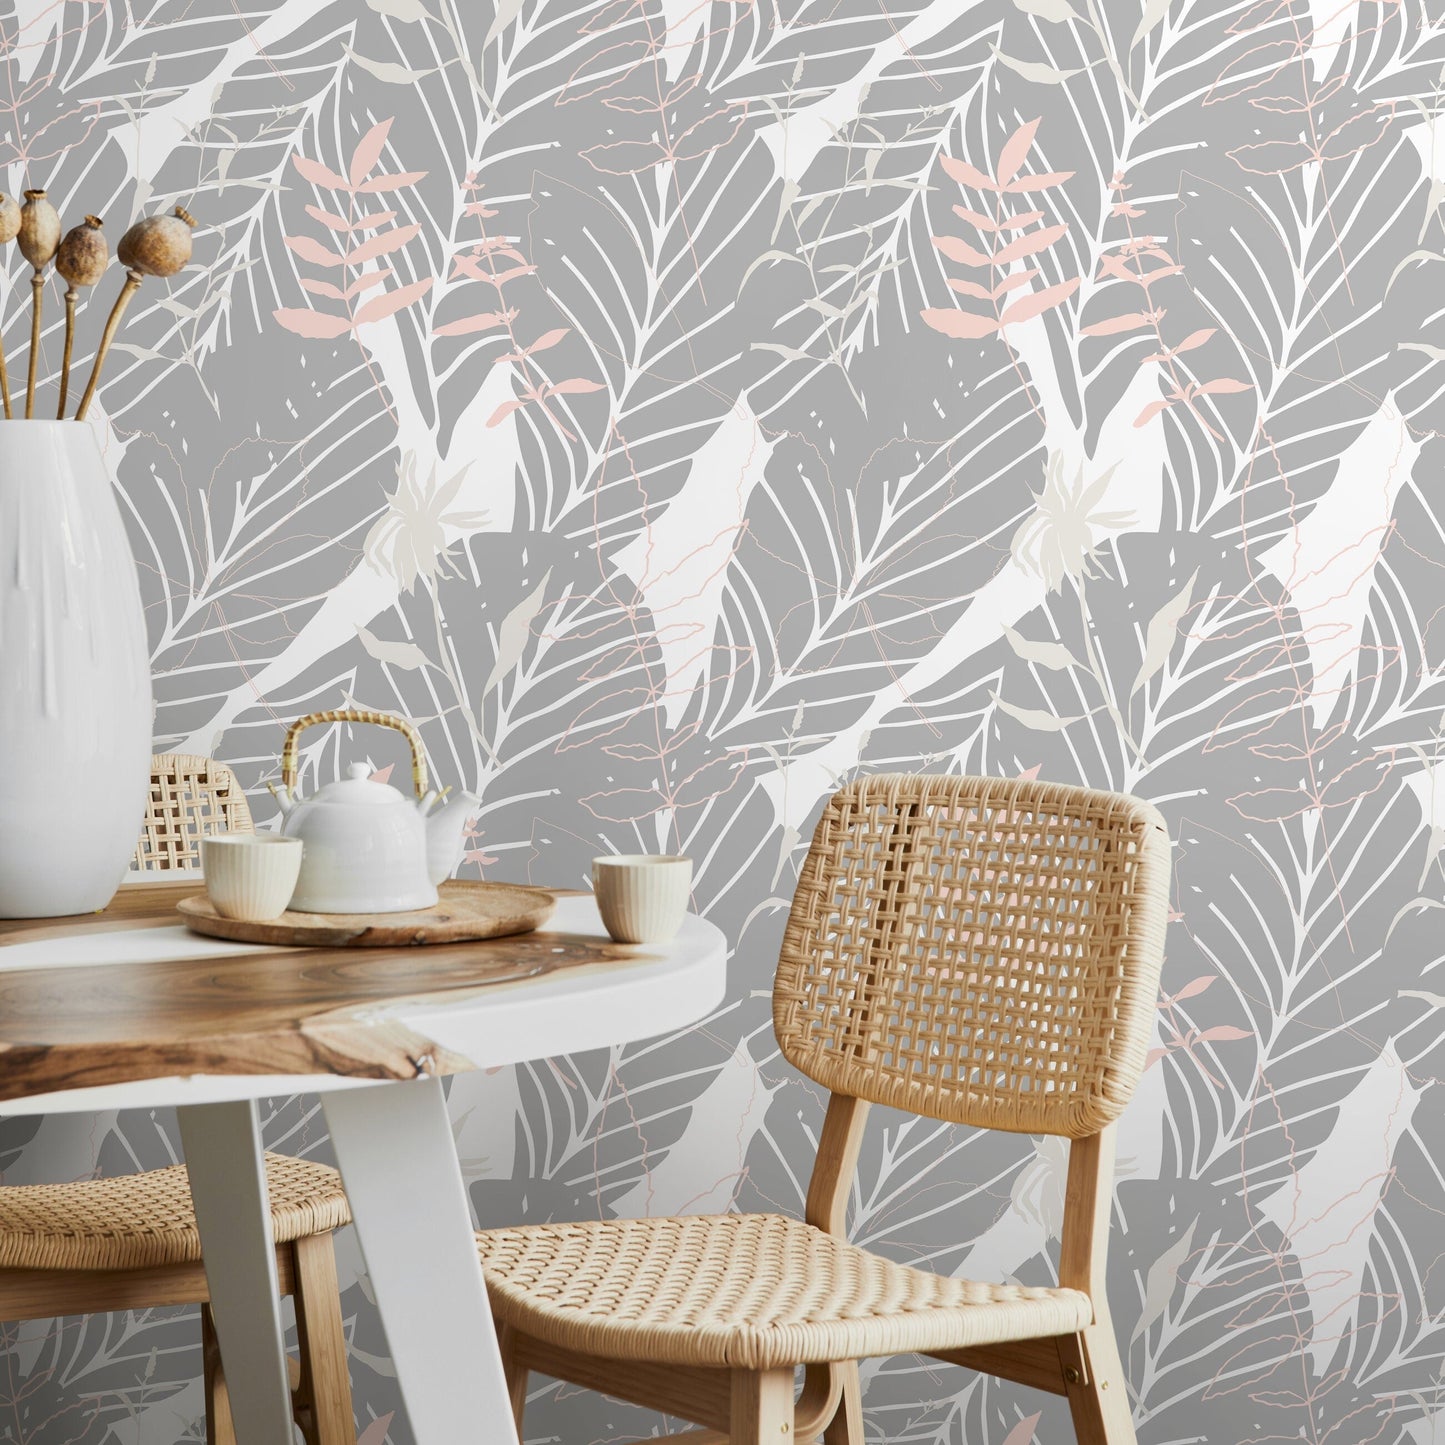 Removable Wallpaper Floral Wall Temporary Wallpaper Nursery Wallpaper Wall Decor Wall Paper Removable Peel and Stick Wallpaper - A678